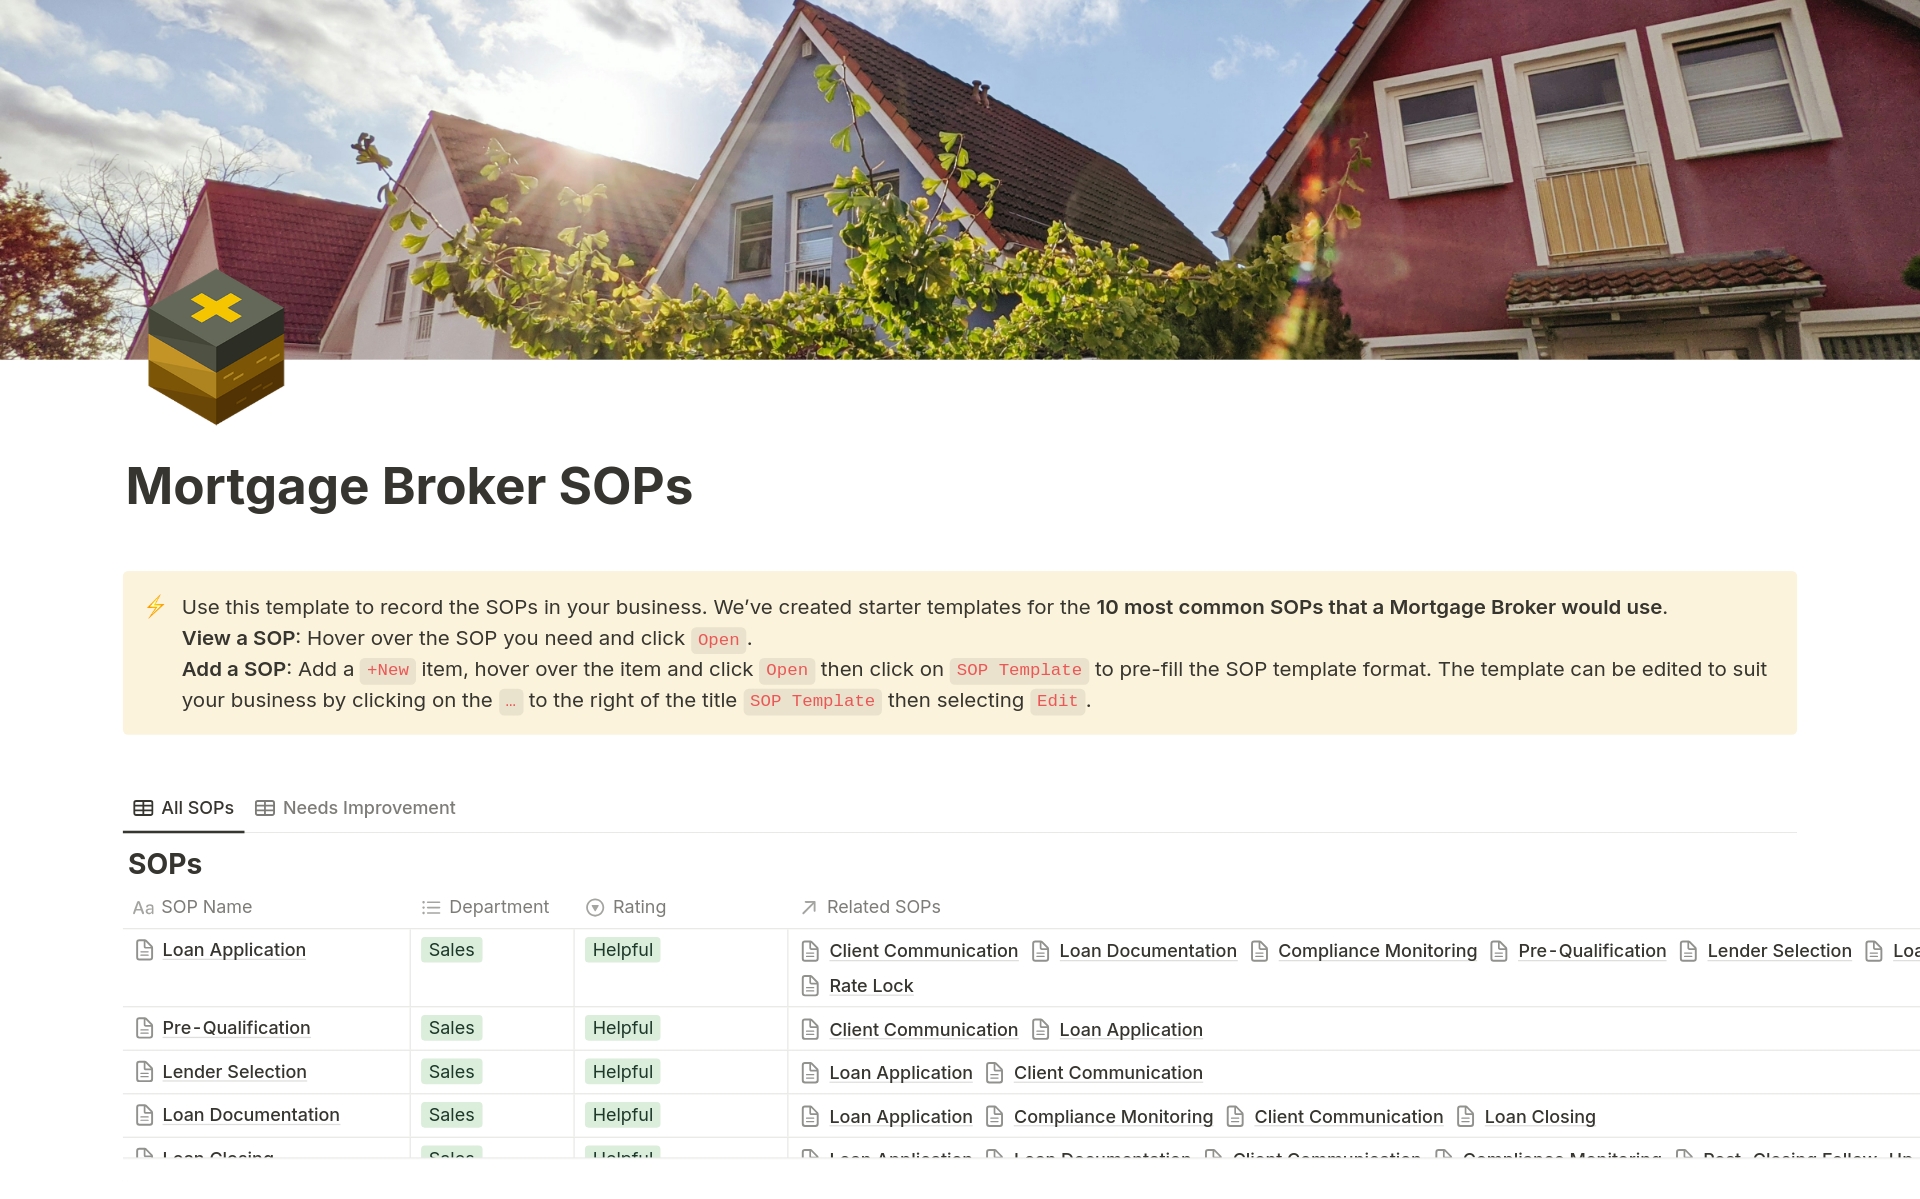 These Mortgage Broker Standard Operating Procedures (SOPs) provide a detailed framework for managing the entire mortgage loan process while ensuring compliance with industry standards and regulations. Includes 20+ pages of best practice SOPs to save you 10+ hours of research.